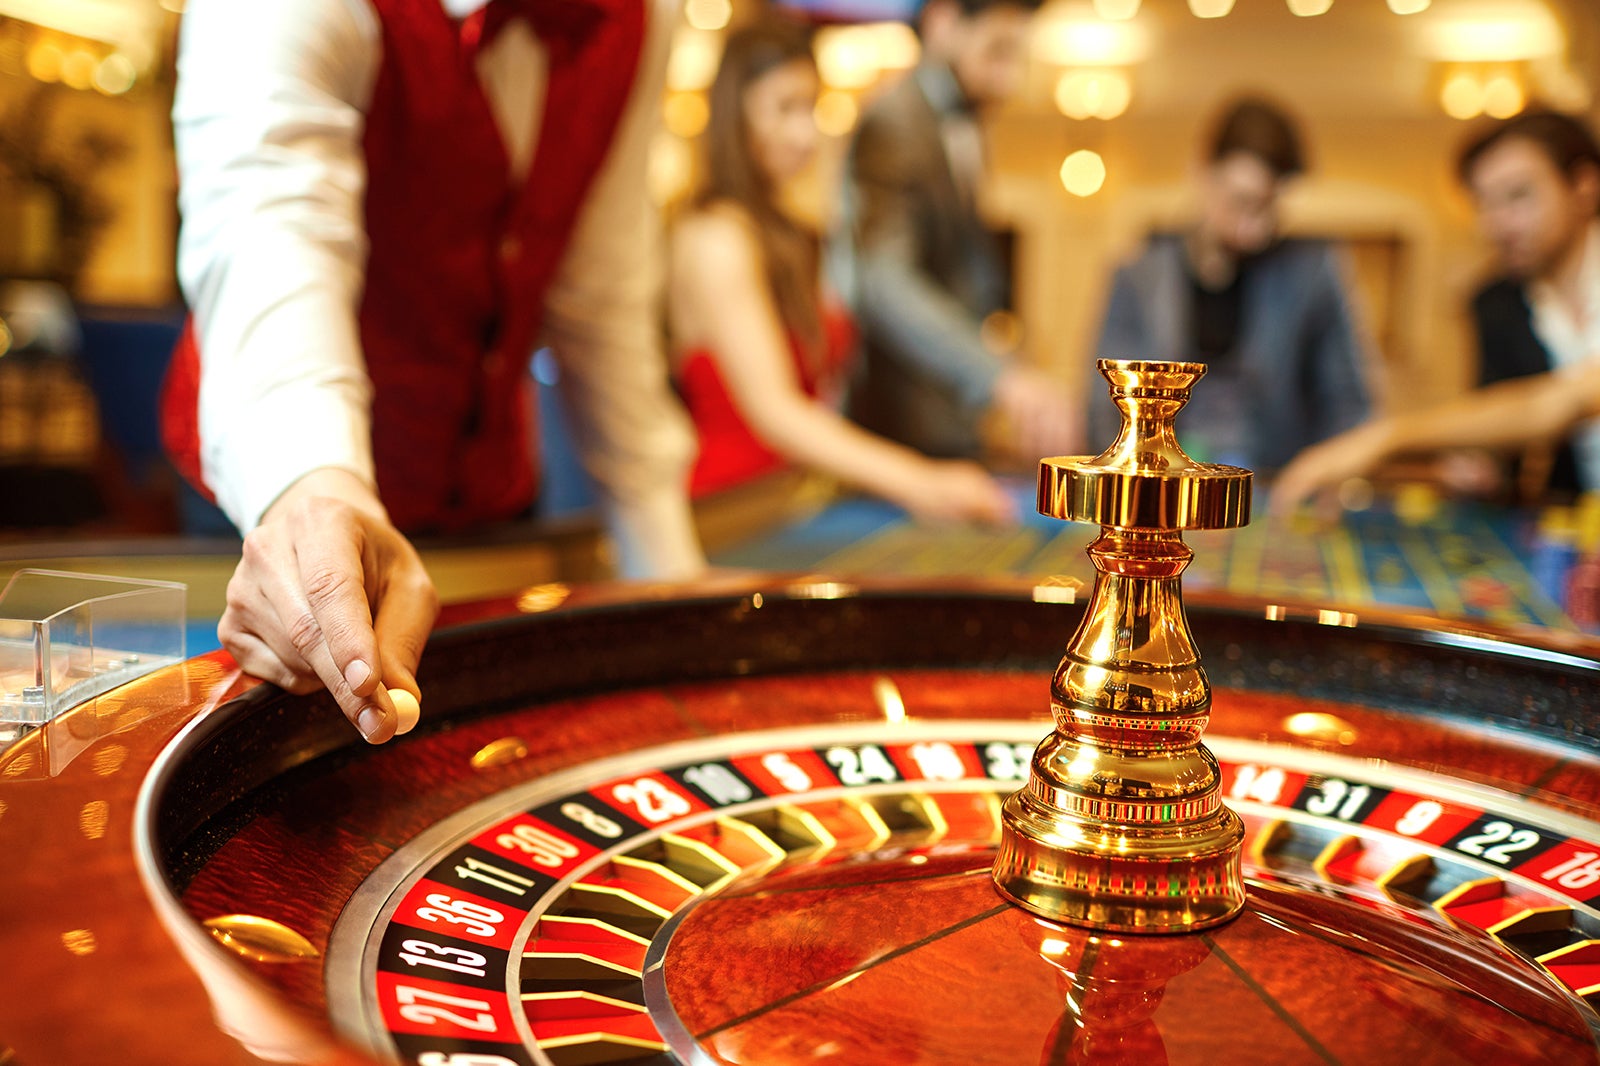 Play a very exciting game of casino and make it big